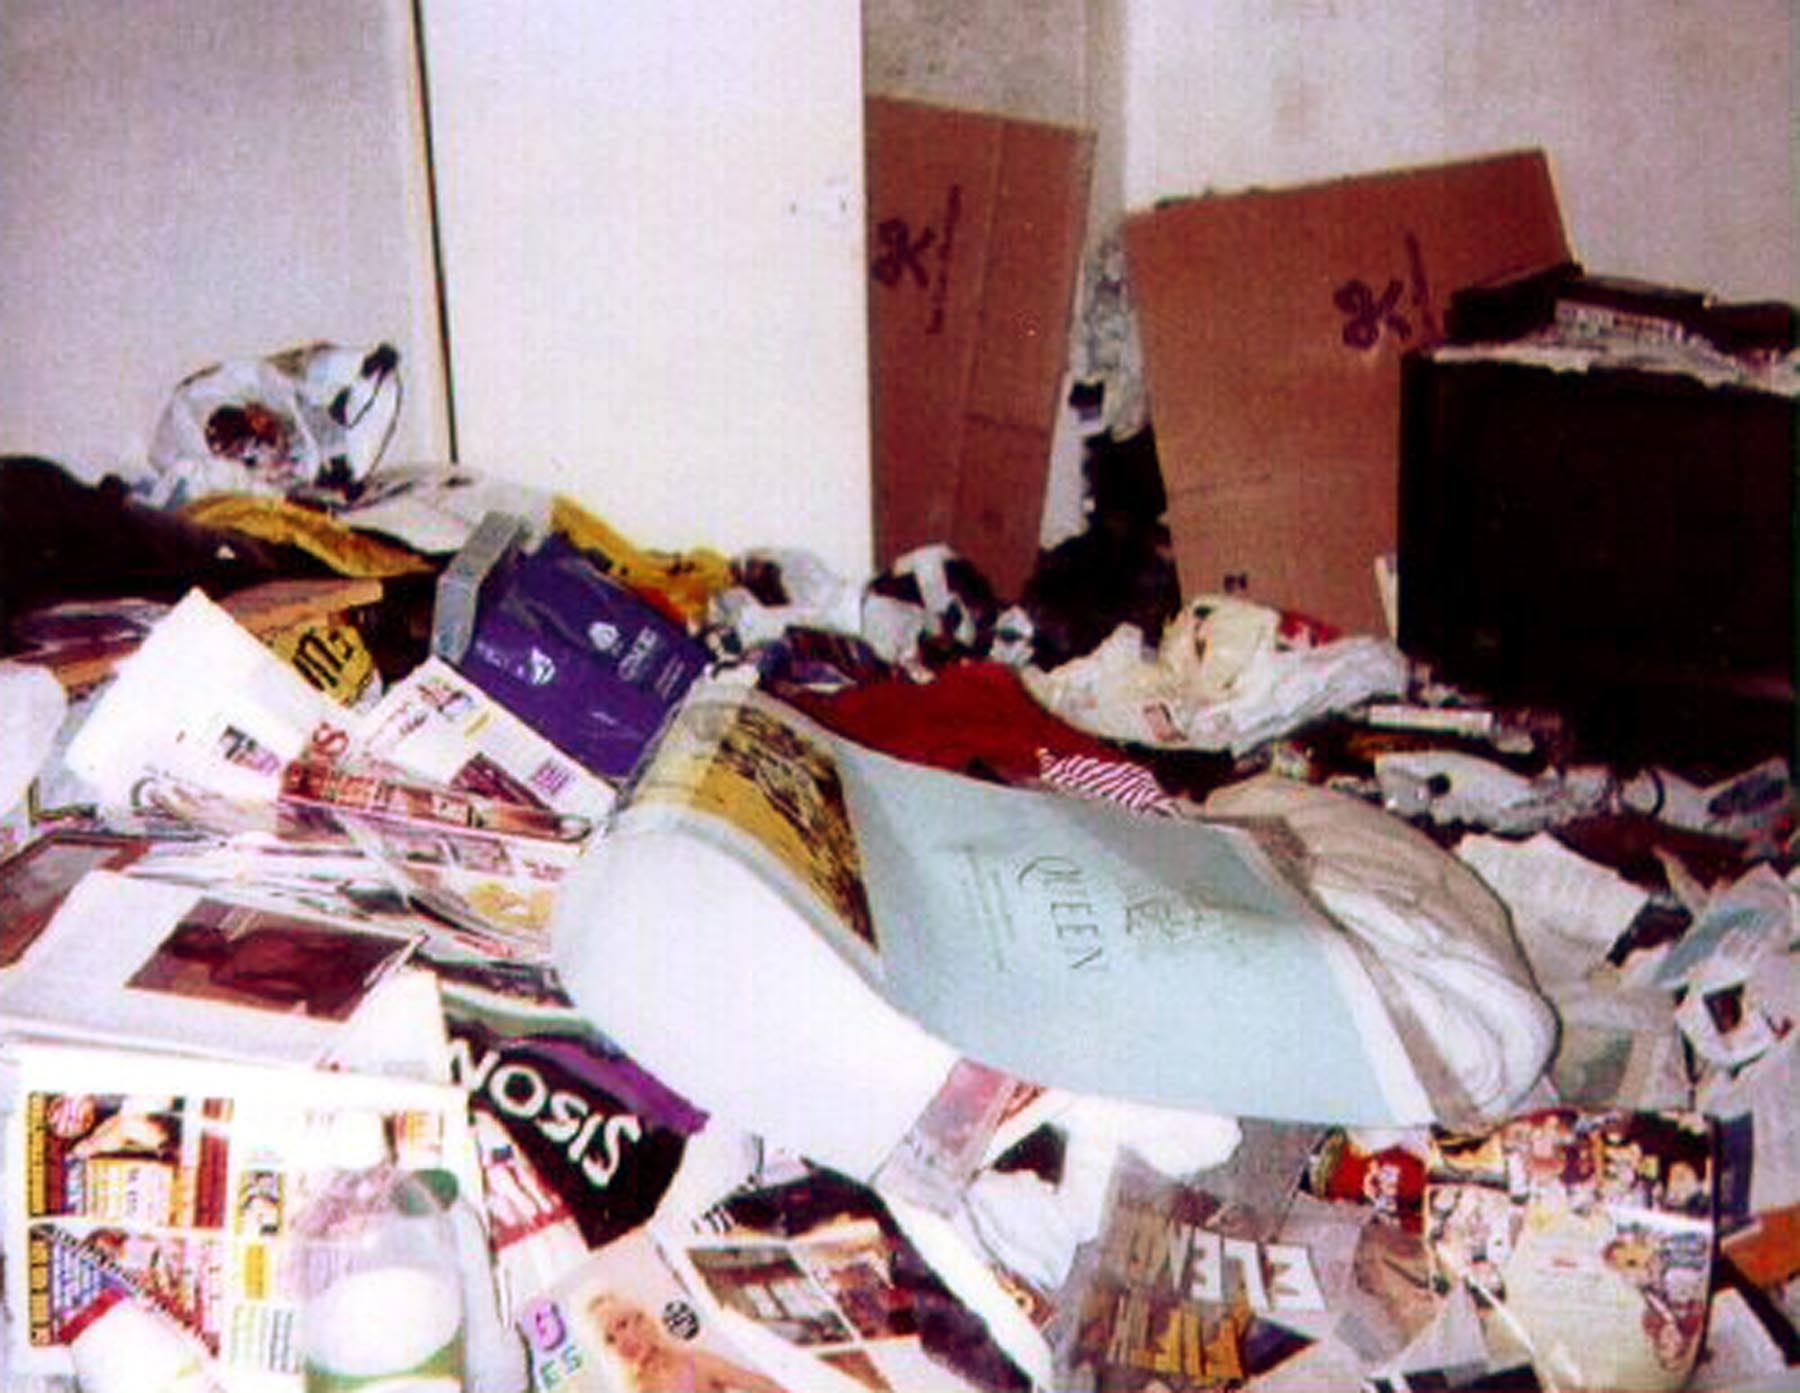 A picture of Barry George’s flat used as an exhibit in his trial